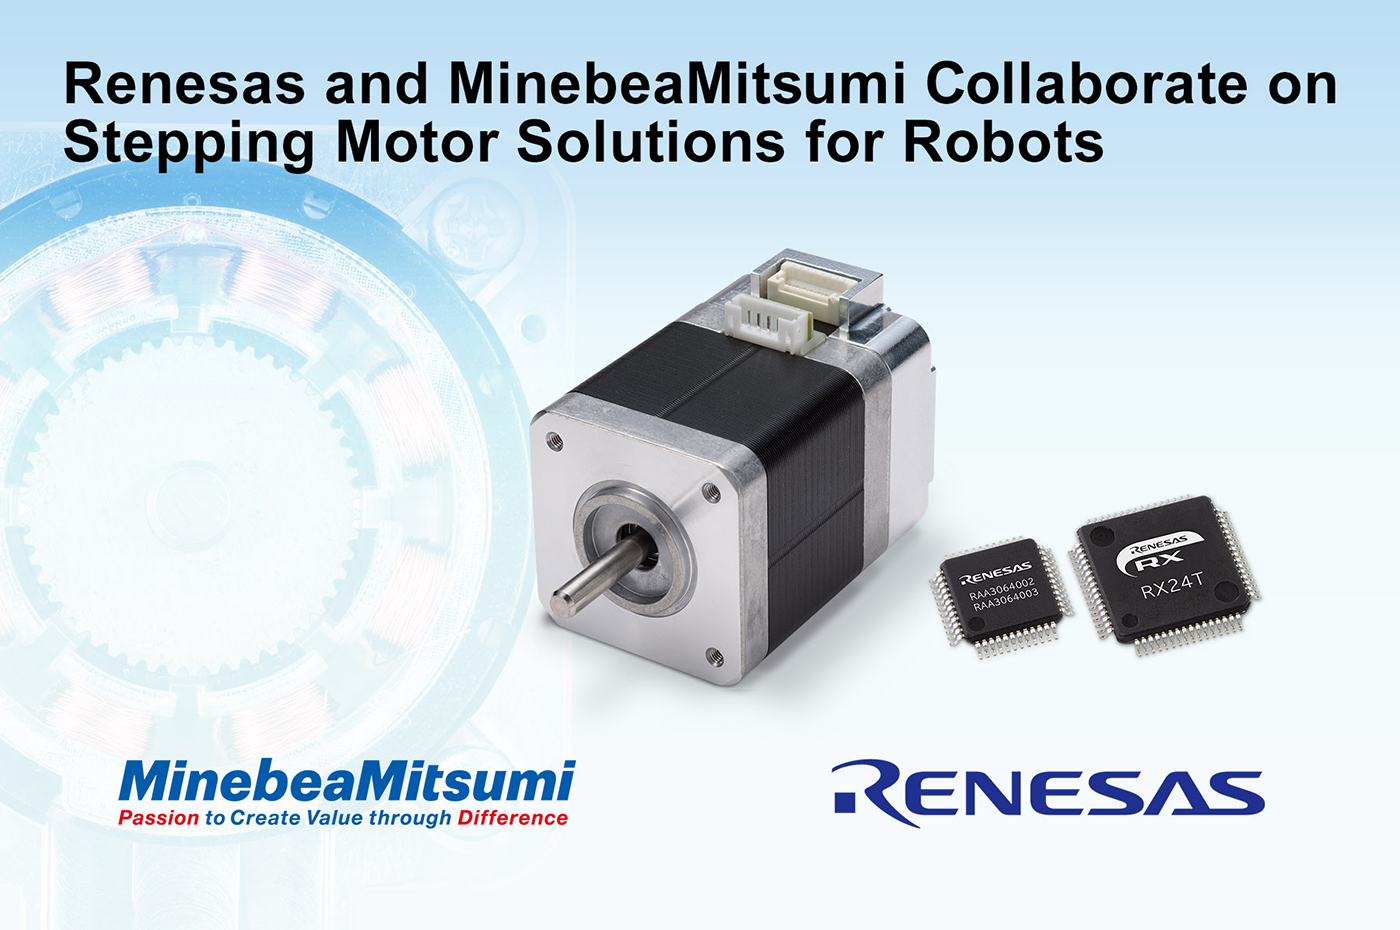 image : Renesas and MinebeaMitsumi Collaborate on Stepping Motor Solutions for Robots